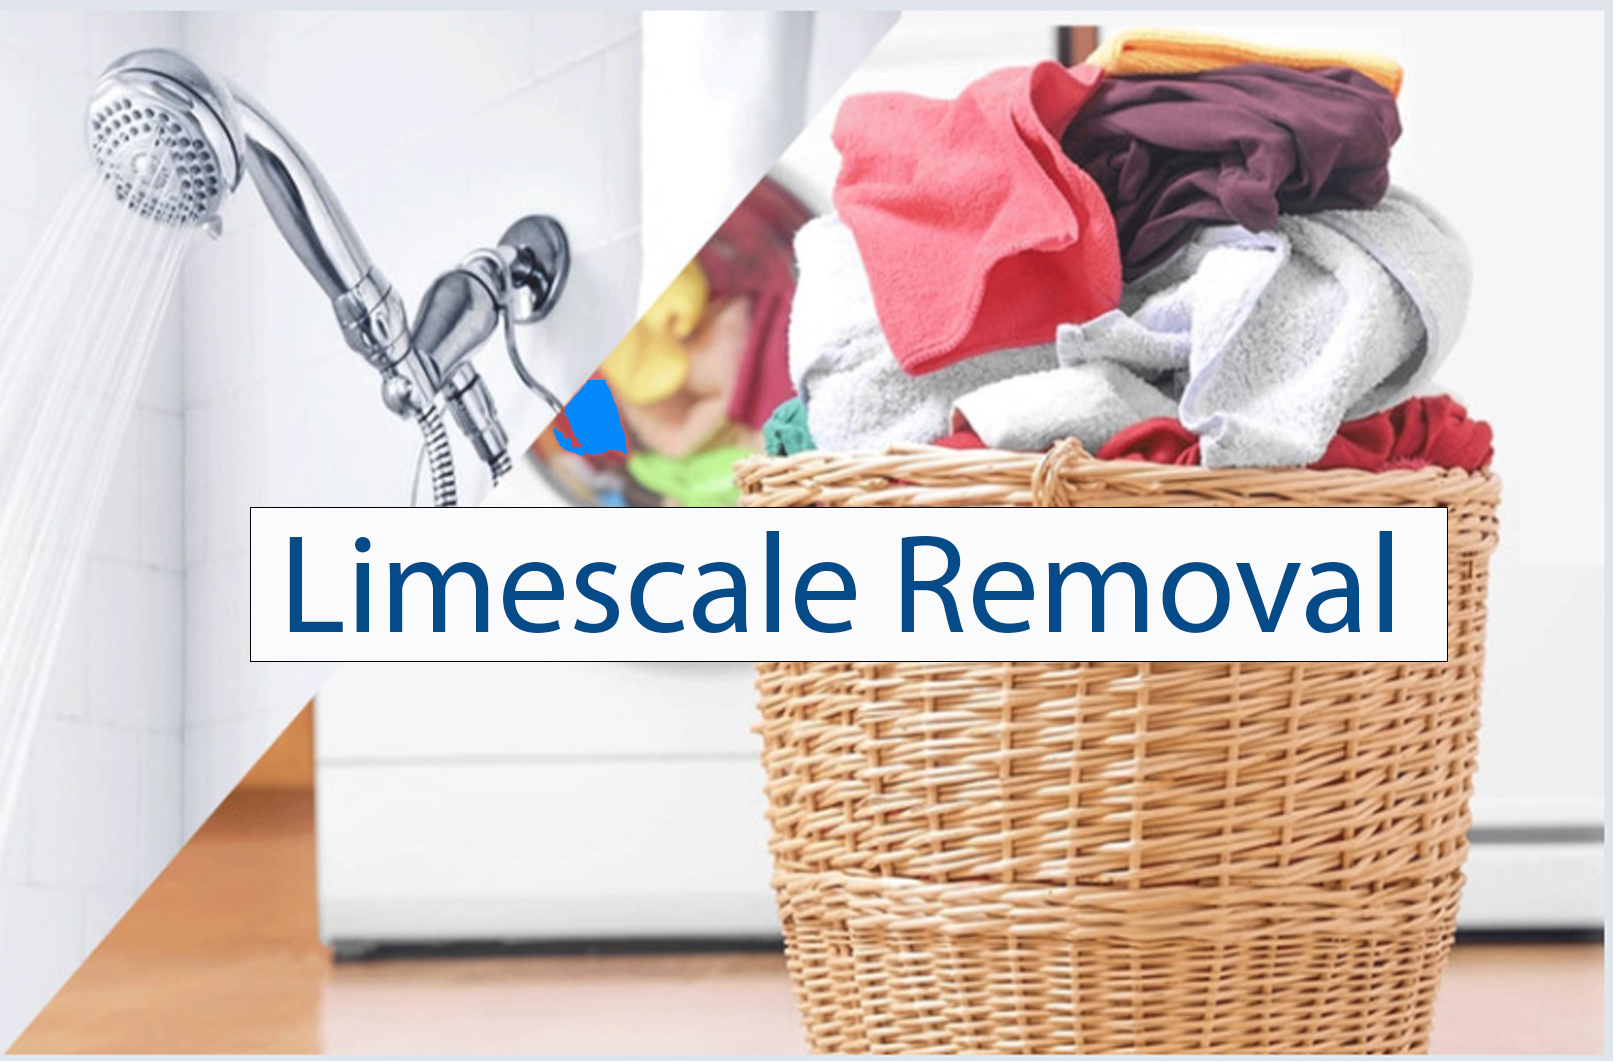 LIMESCALE IS A PROBLEM